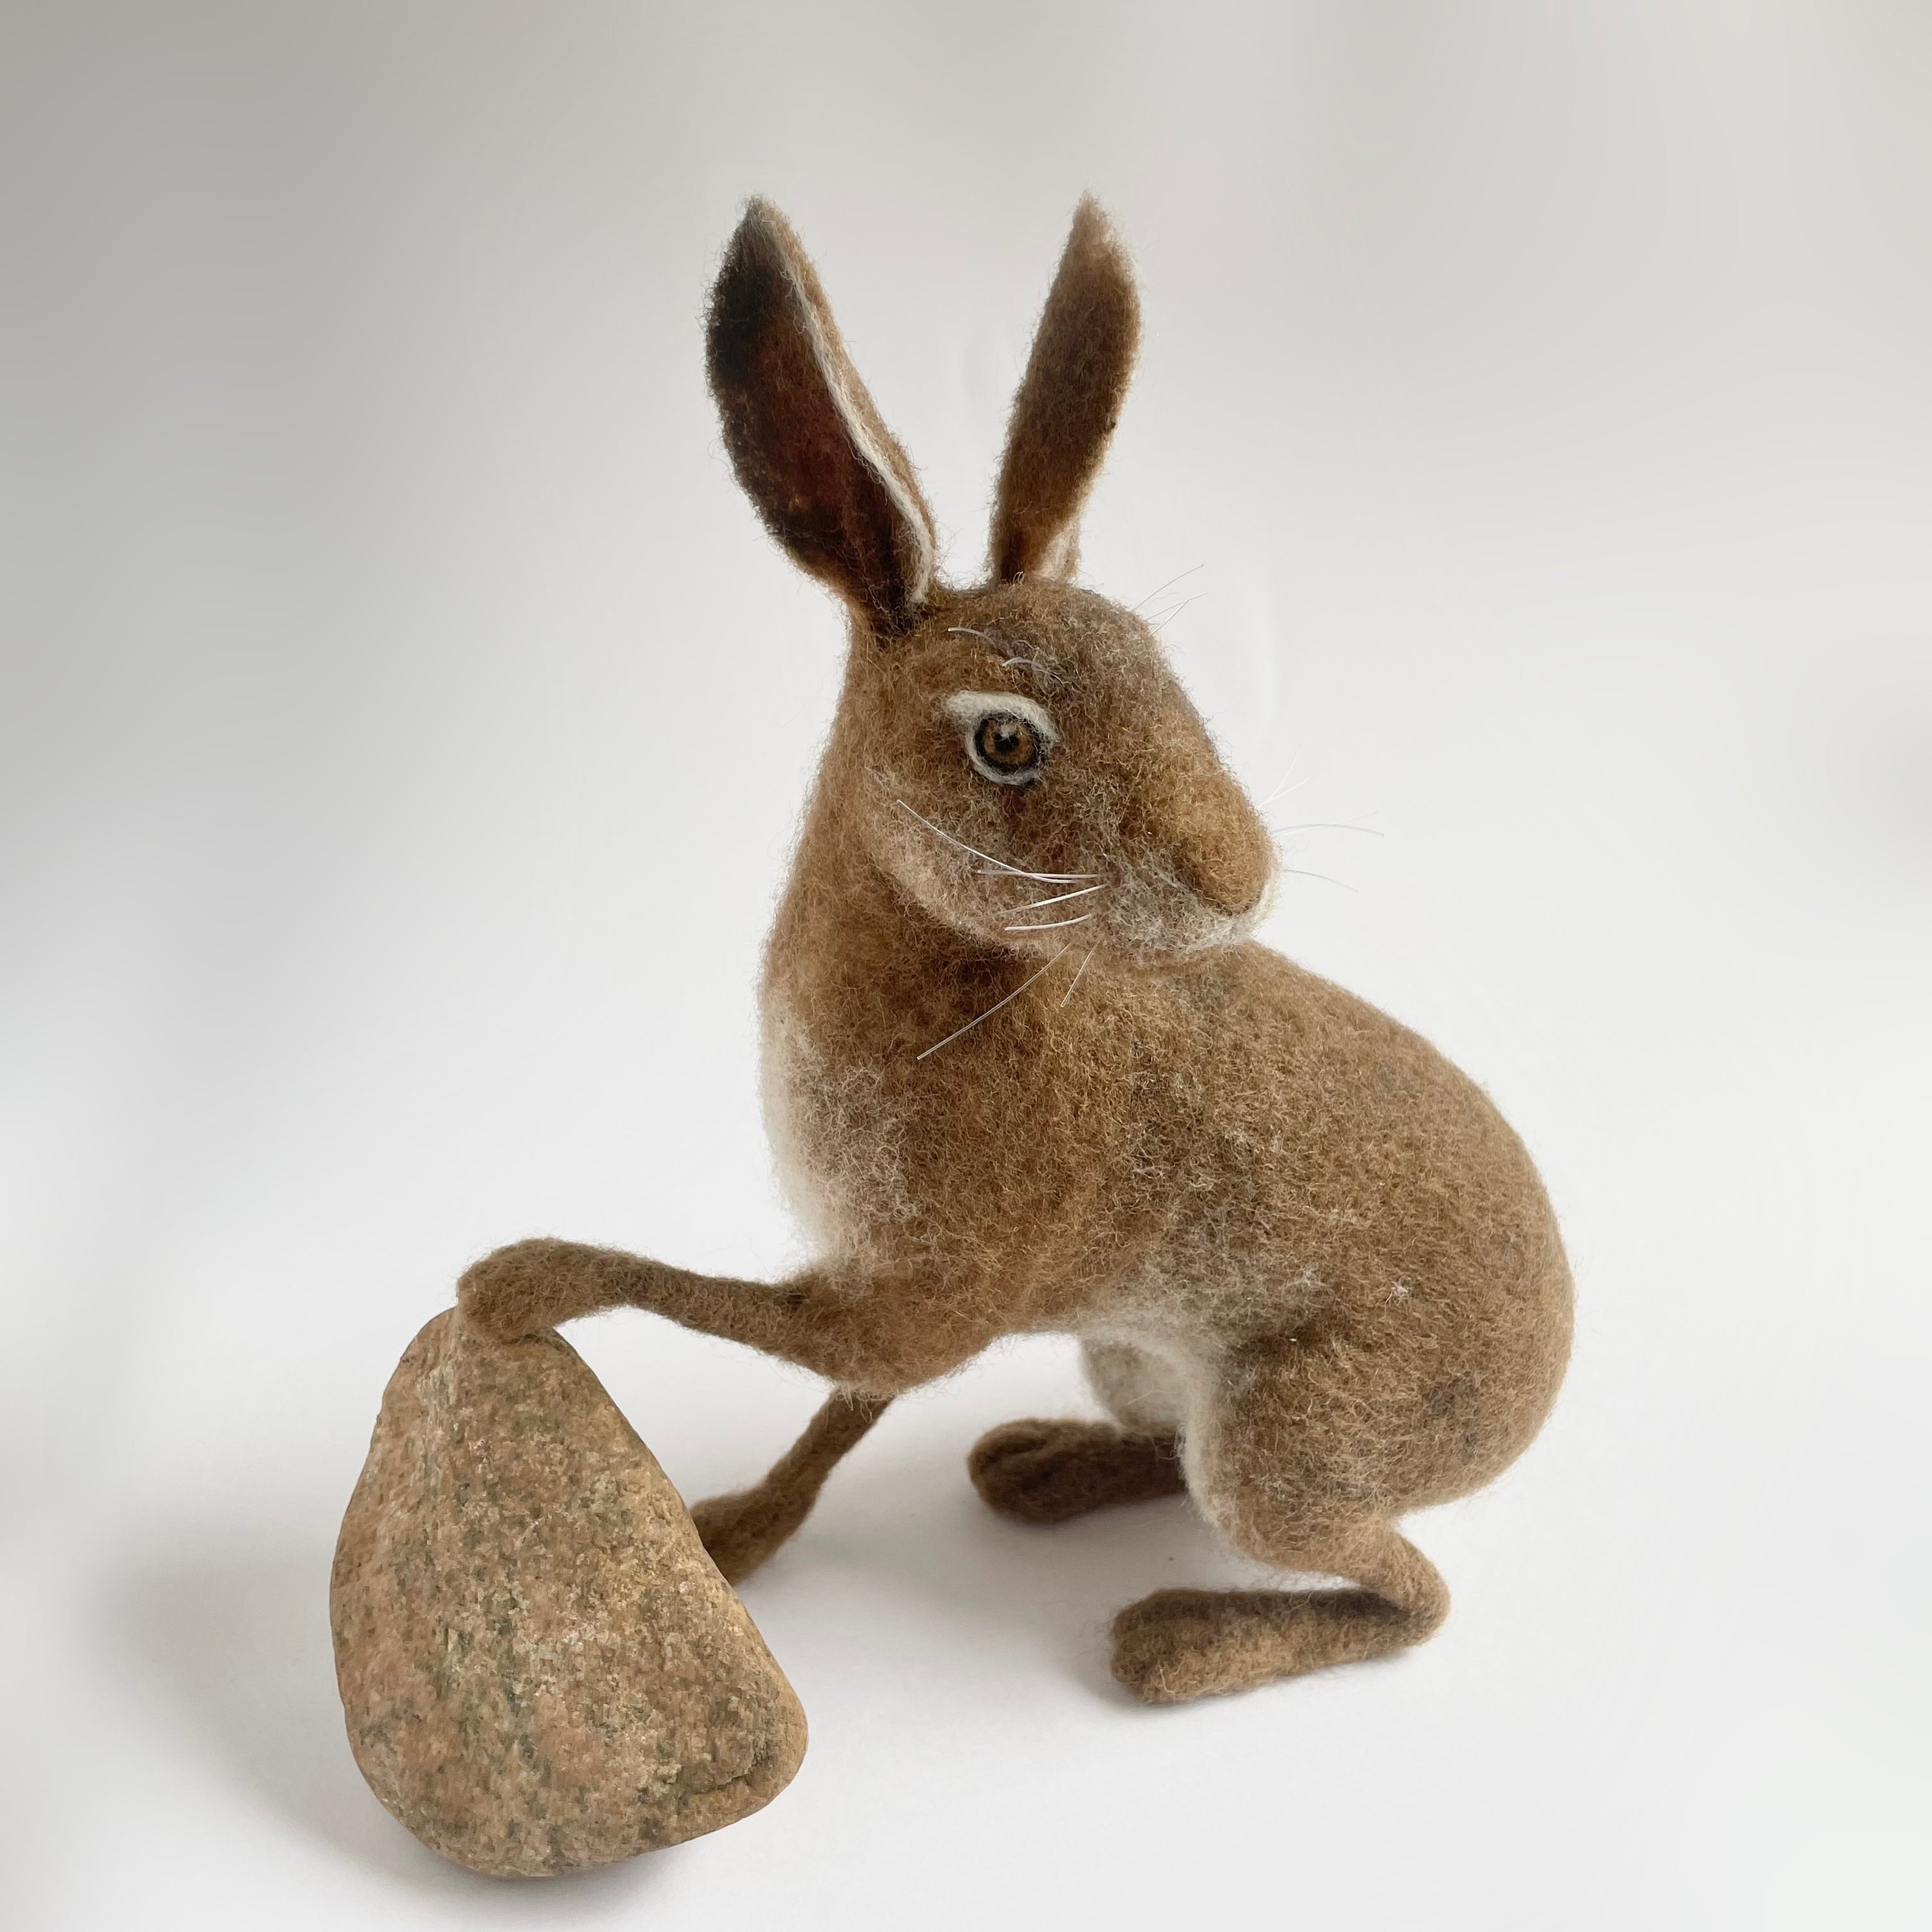 Needle felted wool hare